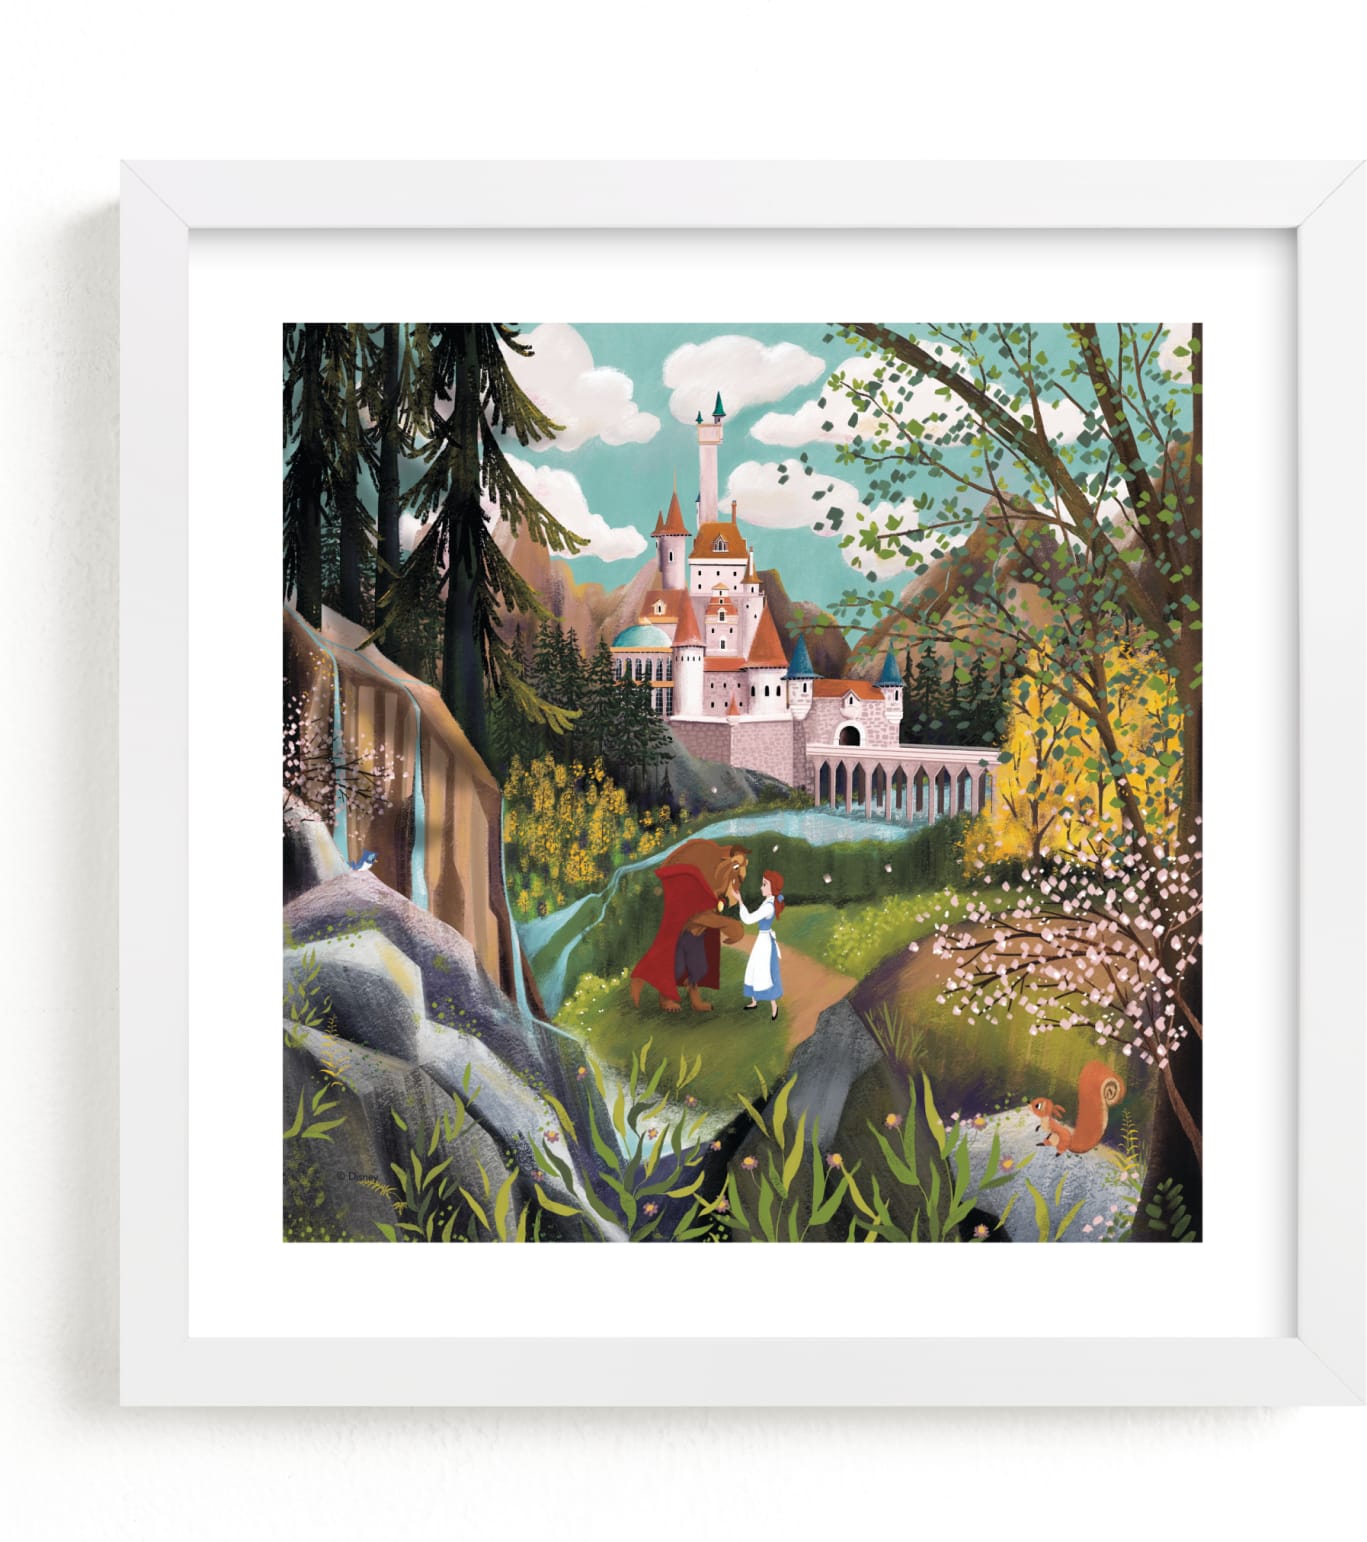 This is a brown disney art by Becky Nimoy called Disney Beauty And The Beast Castle Grounds.